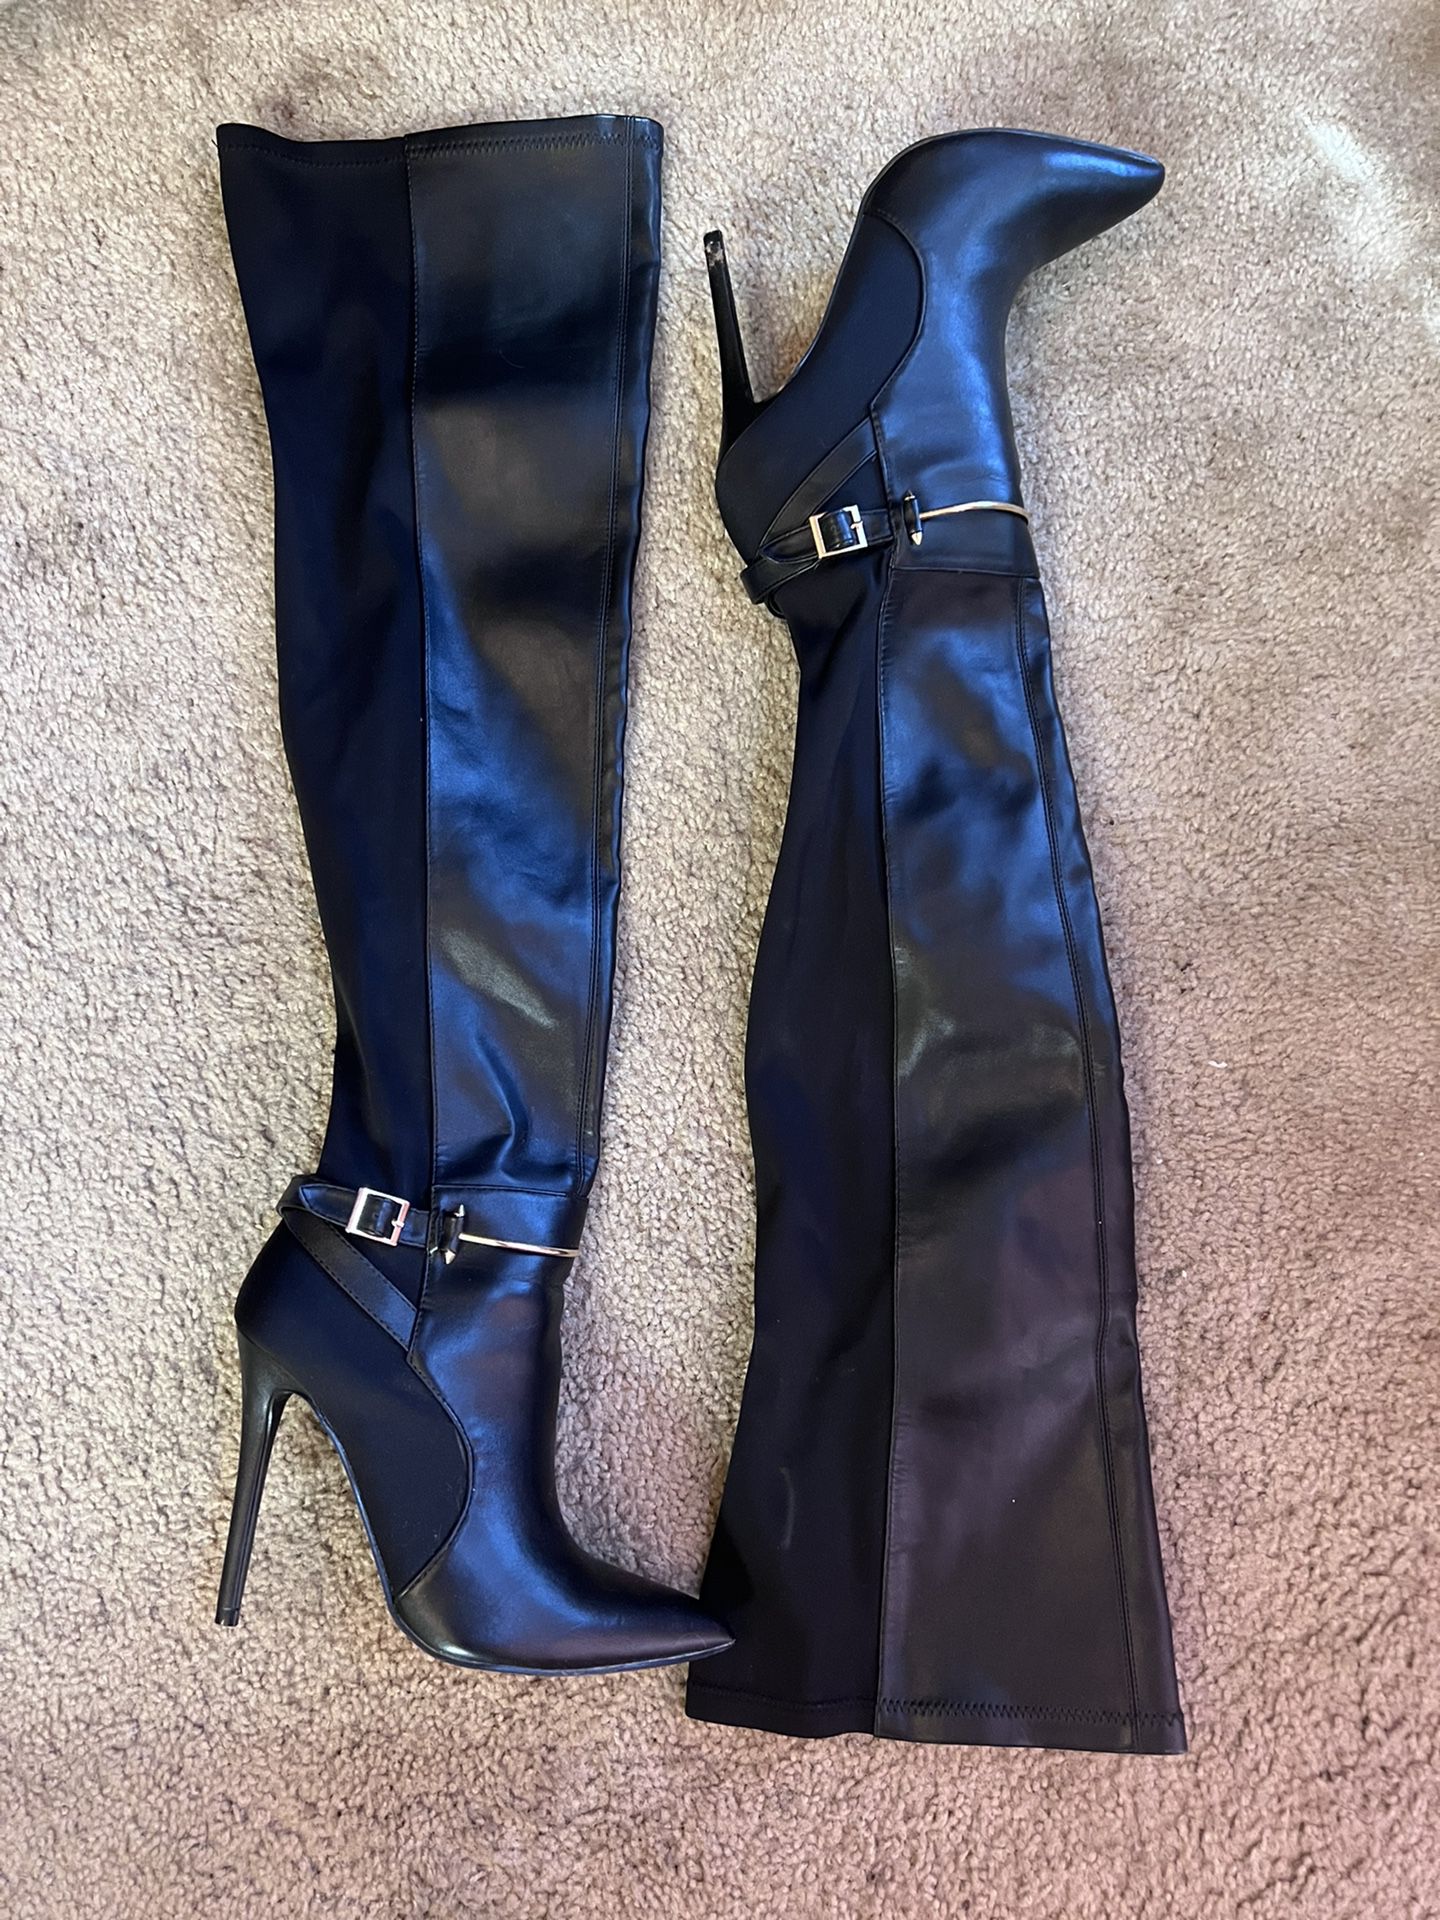 Thigh High Boots Black With 4.5” Heel